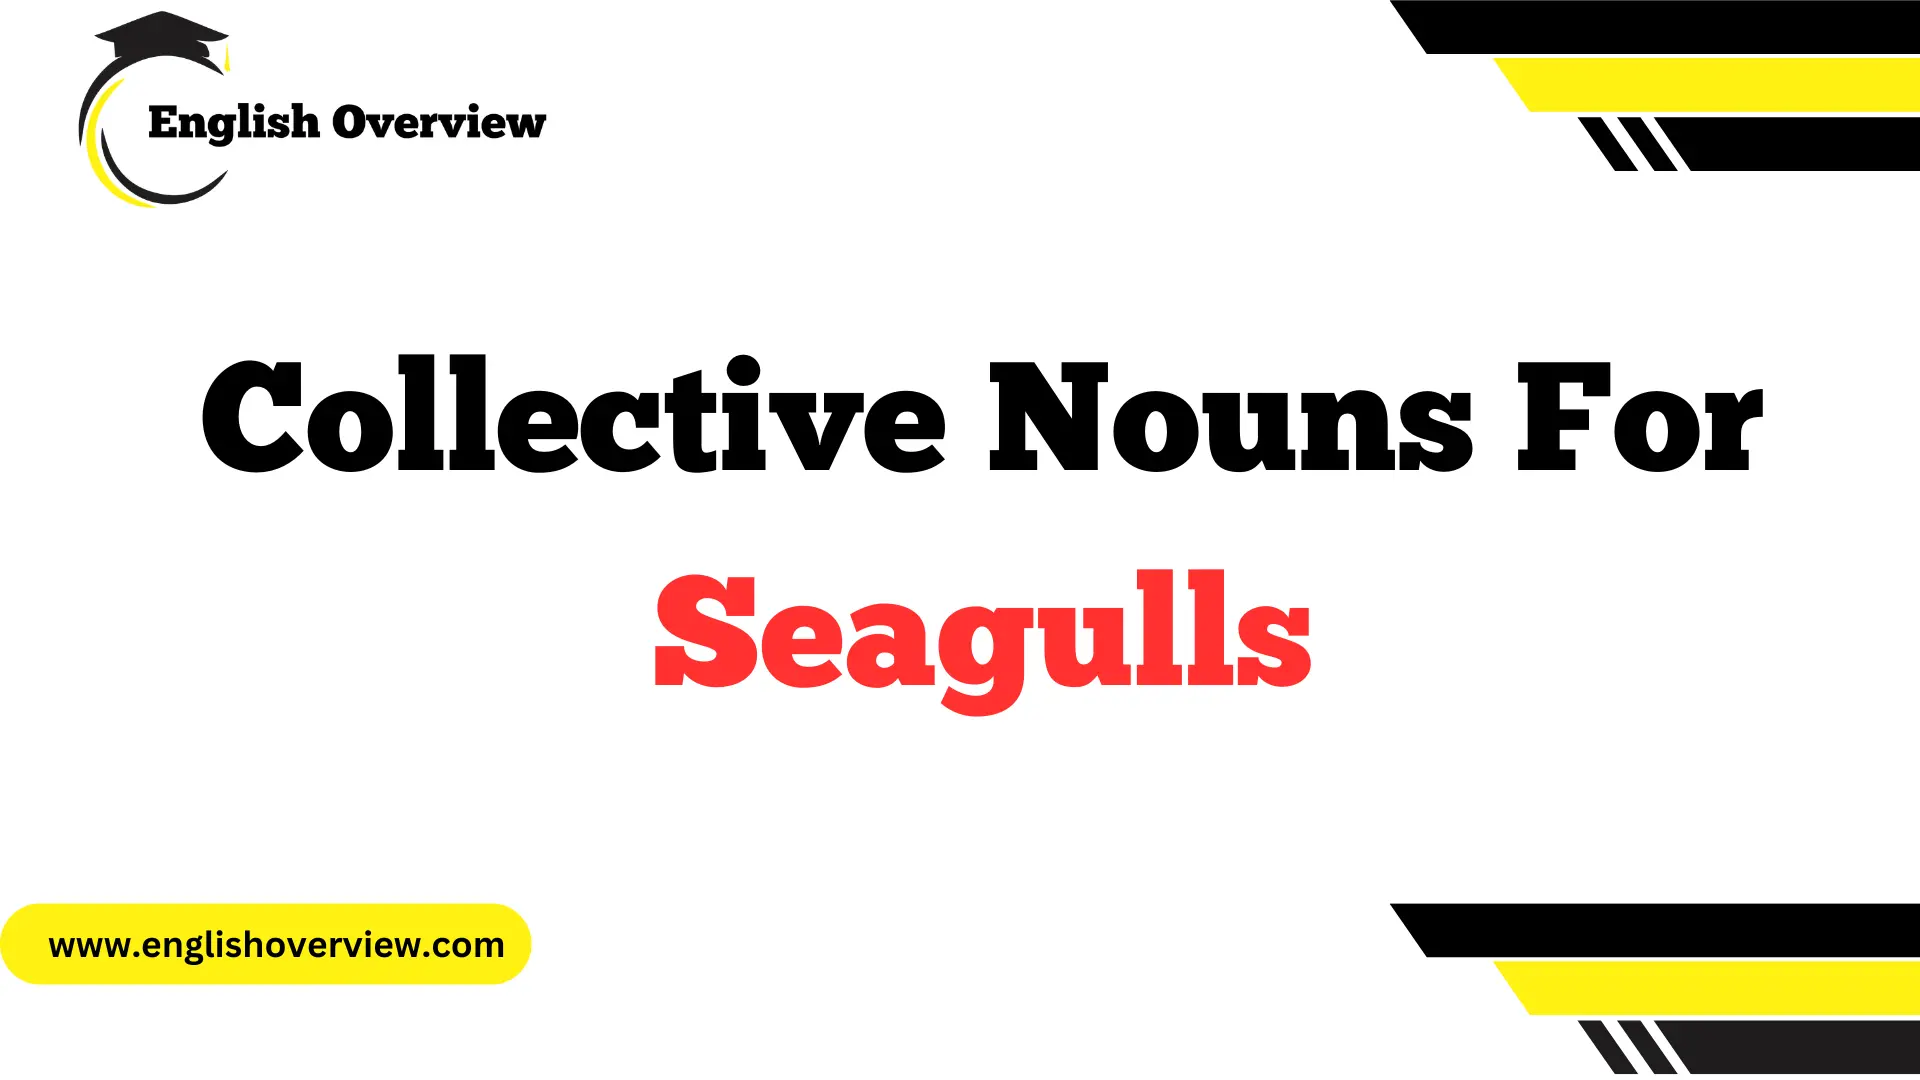 Collective Nouns For Seagulls